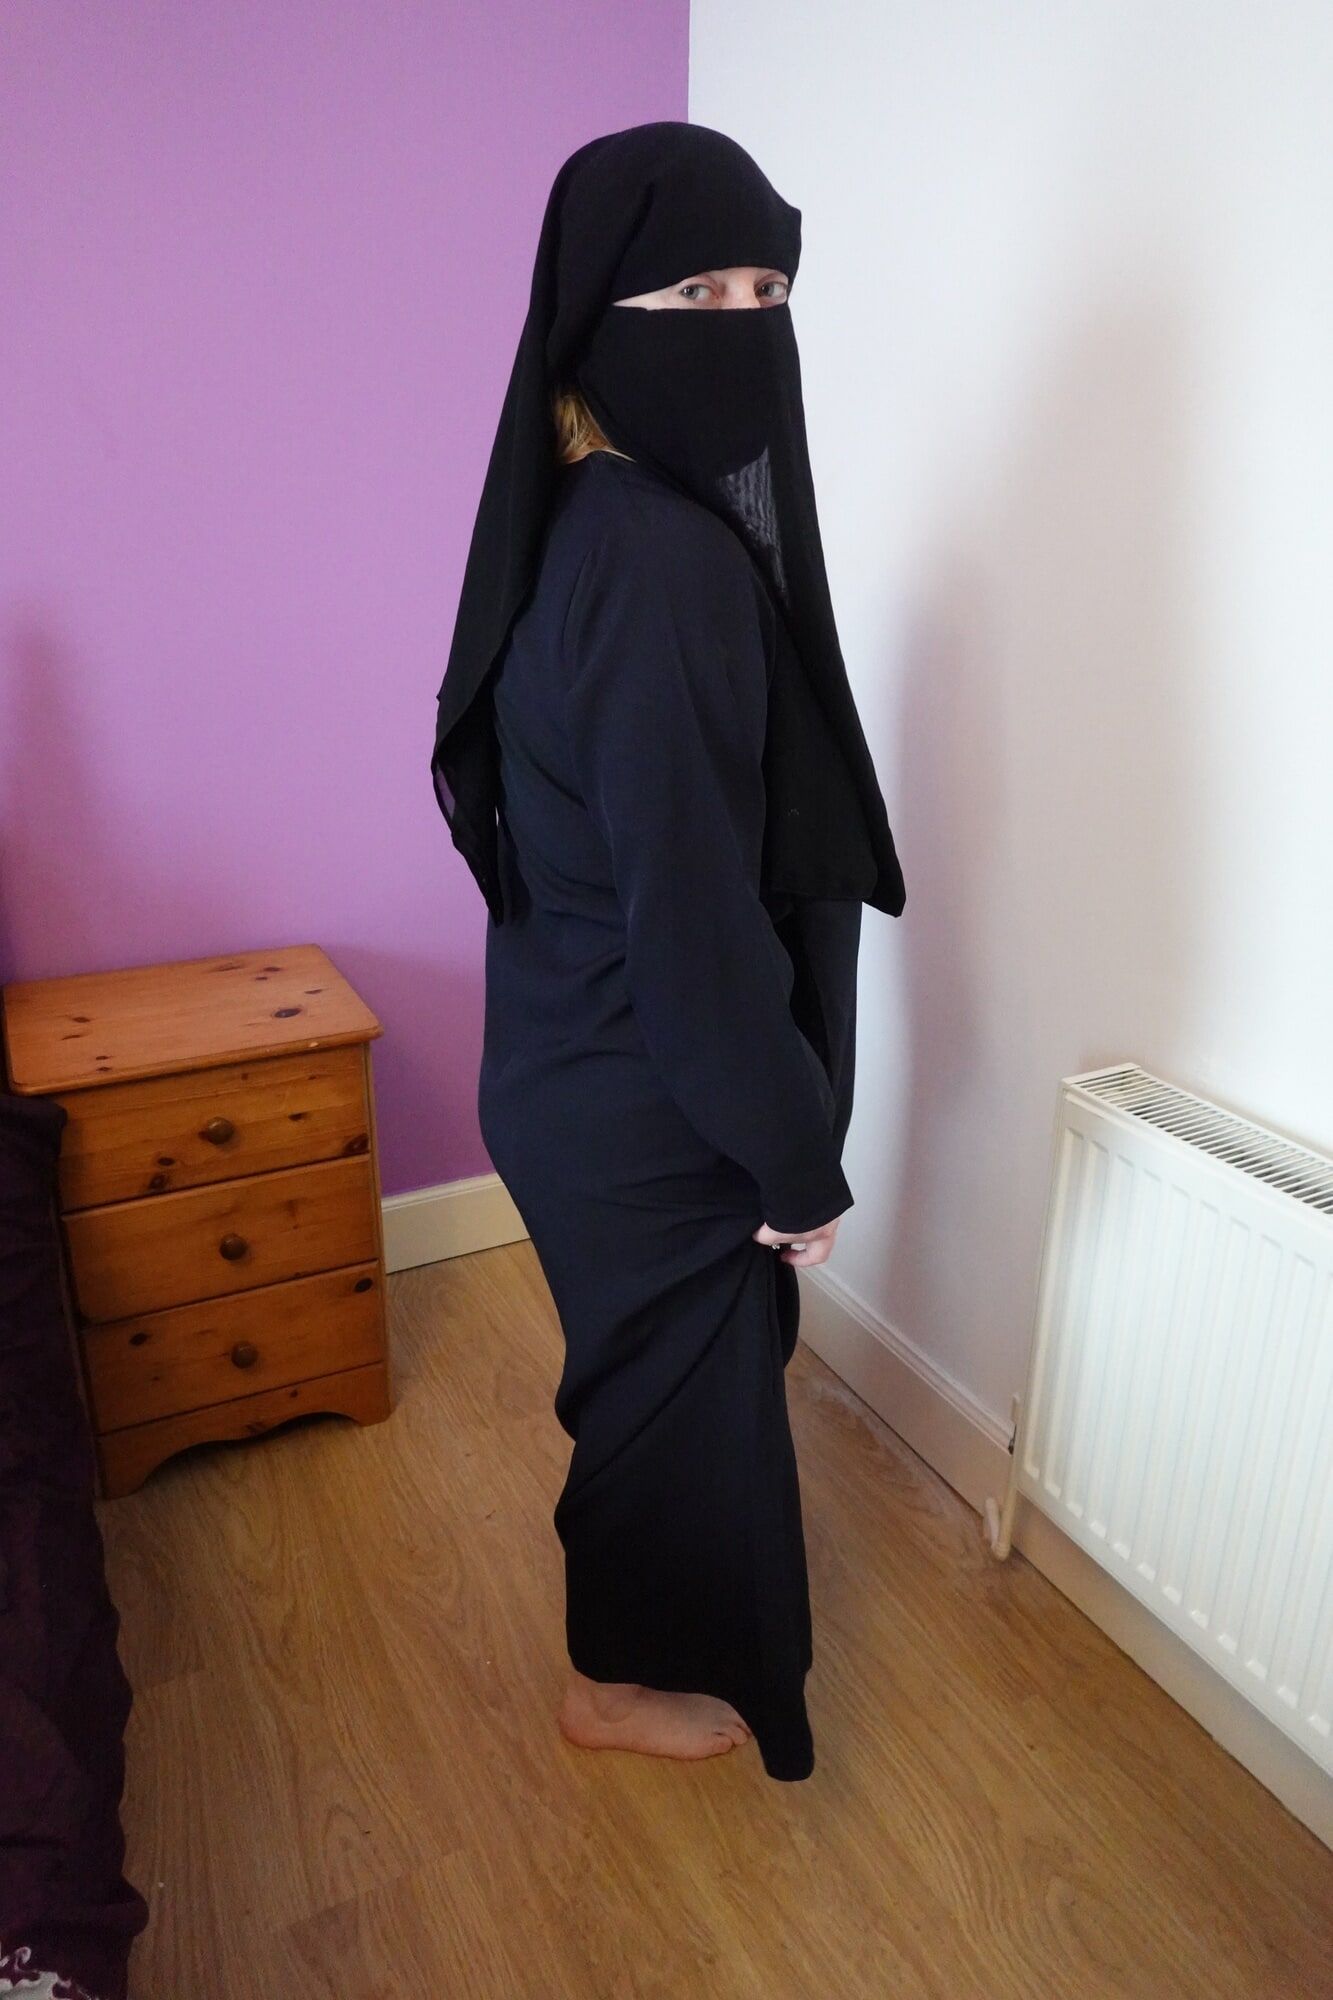 wife wearing Burqa with Niqab naked underneath